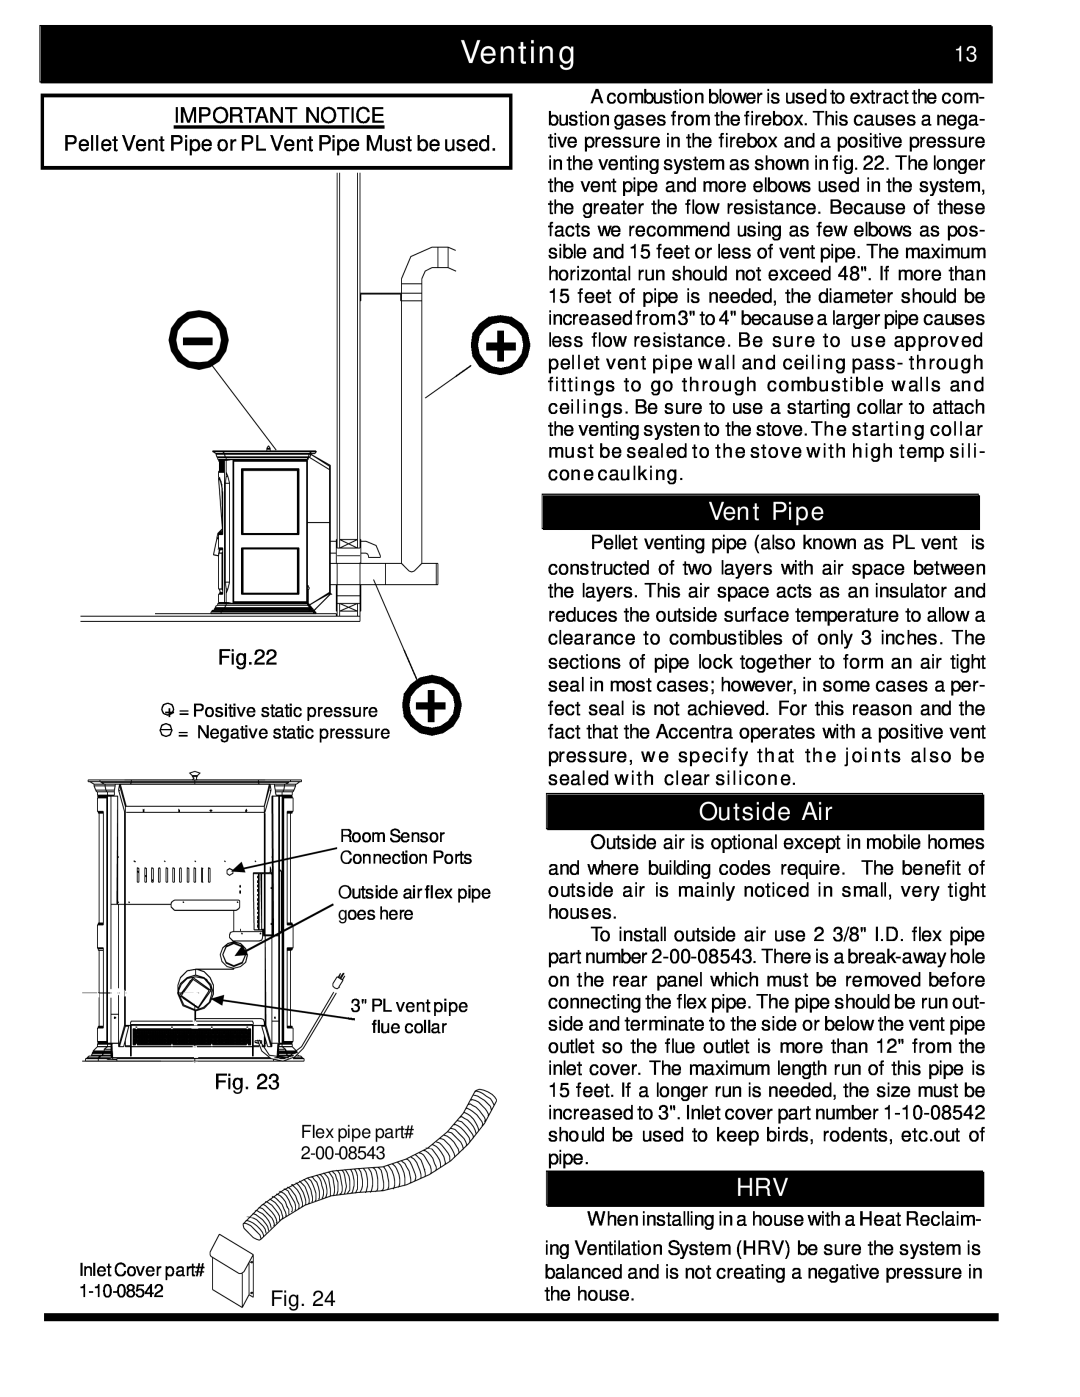 Harman Stove Company 2 manual Venting, Vent Pipe, Outside Air, Important Notice 